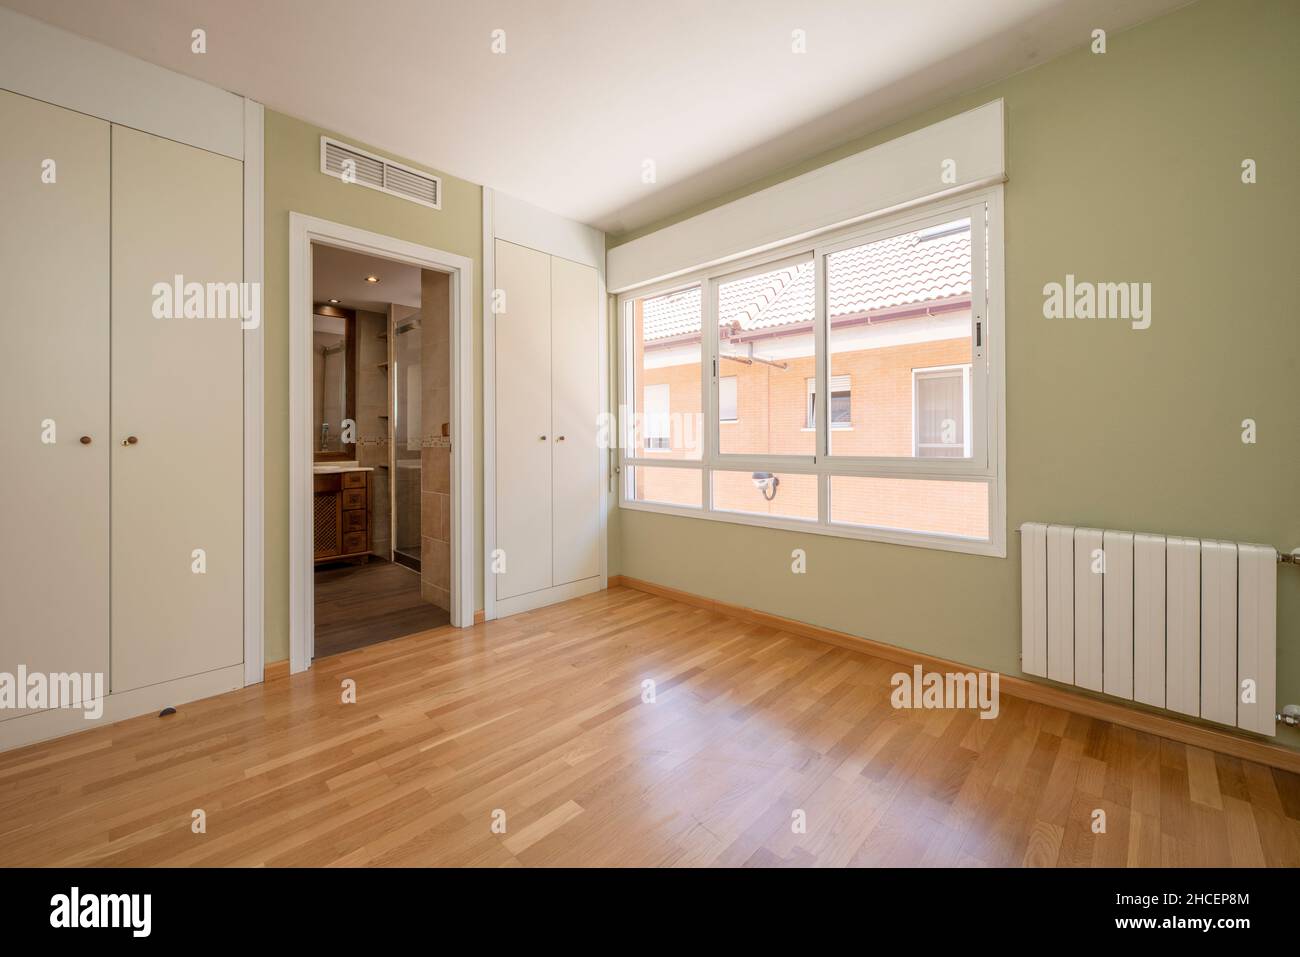 Empty room with greens, en-suite bathroom and oak floors with large windows. Stock Photo